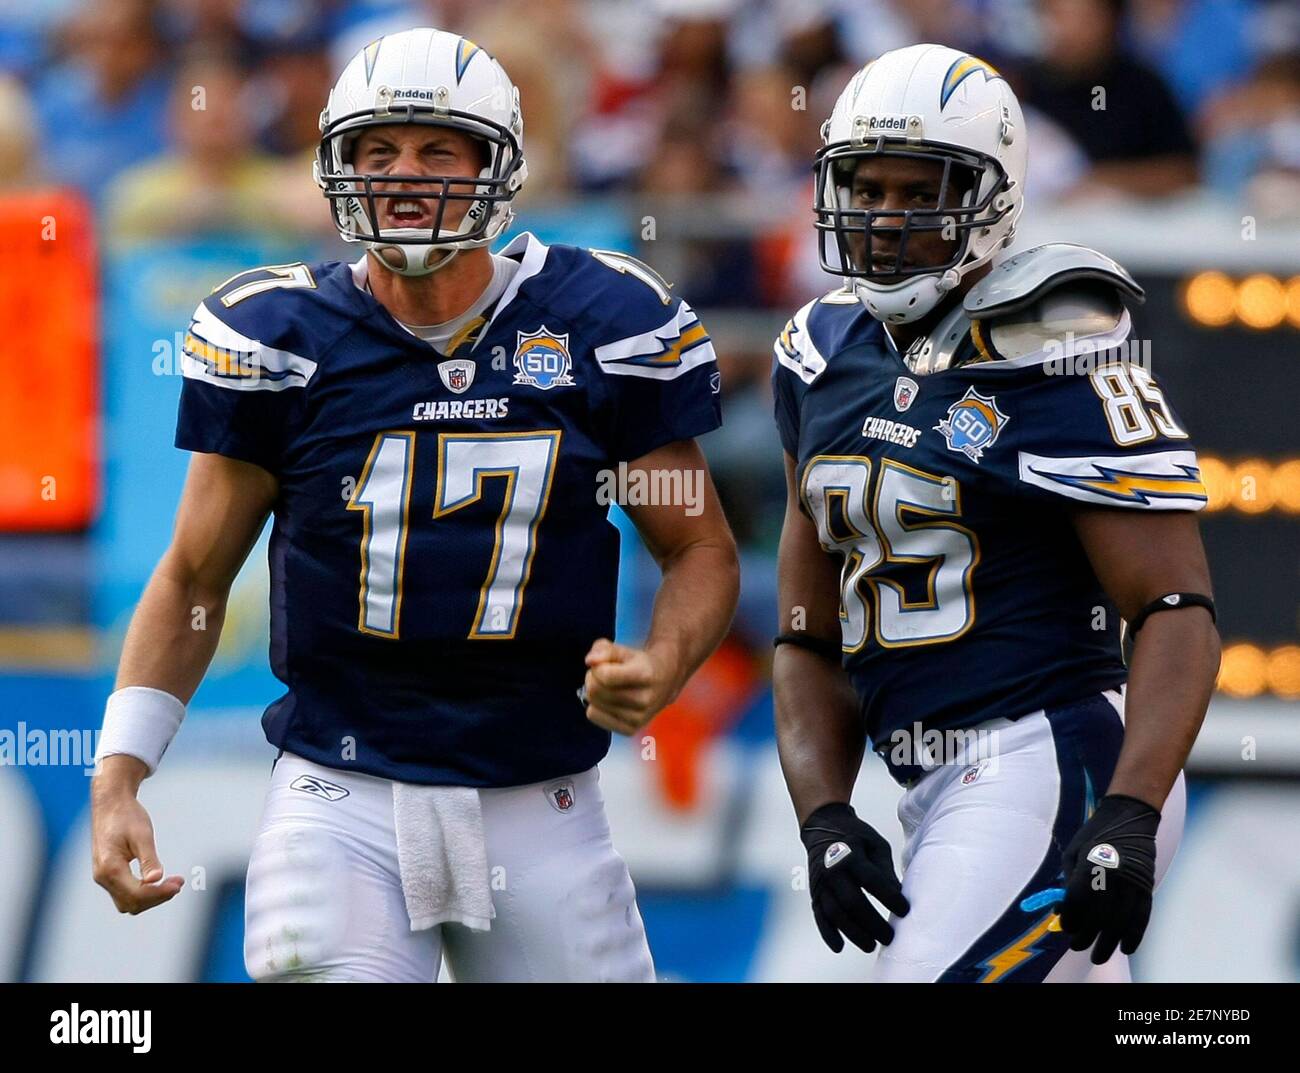 San Diego Chargers quarterback Philip Rivers (L) yells at the referee after teammate Antonio Gates was roughed up on a pass play that saw no flag thrown during their NFL football game in San Diego, California December 20, 2009.    REUTERS/Mike Blake    (UNITED STATES - Tags: SPORT FOOTBALL) Stock Photo